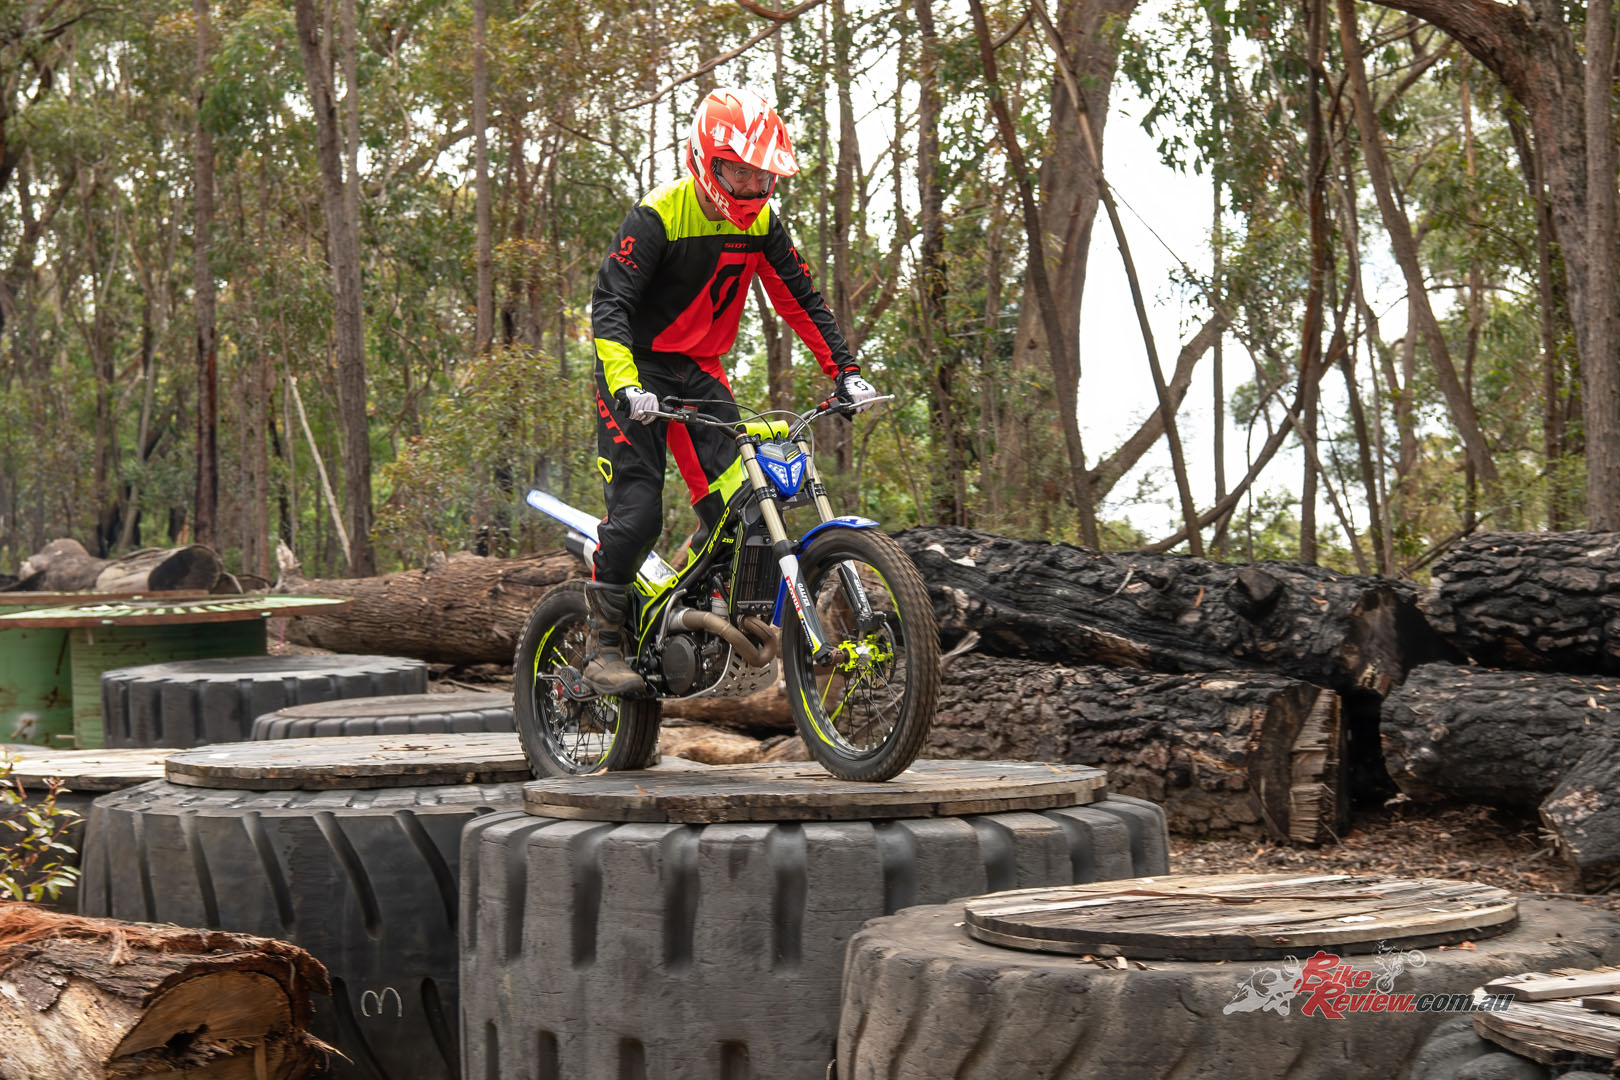 The incredibly capable Sherco held up well to a day of being launched on top of these massive tyres!